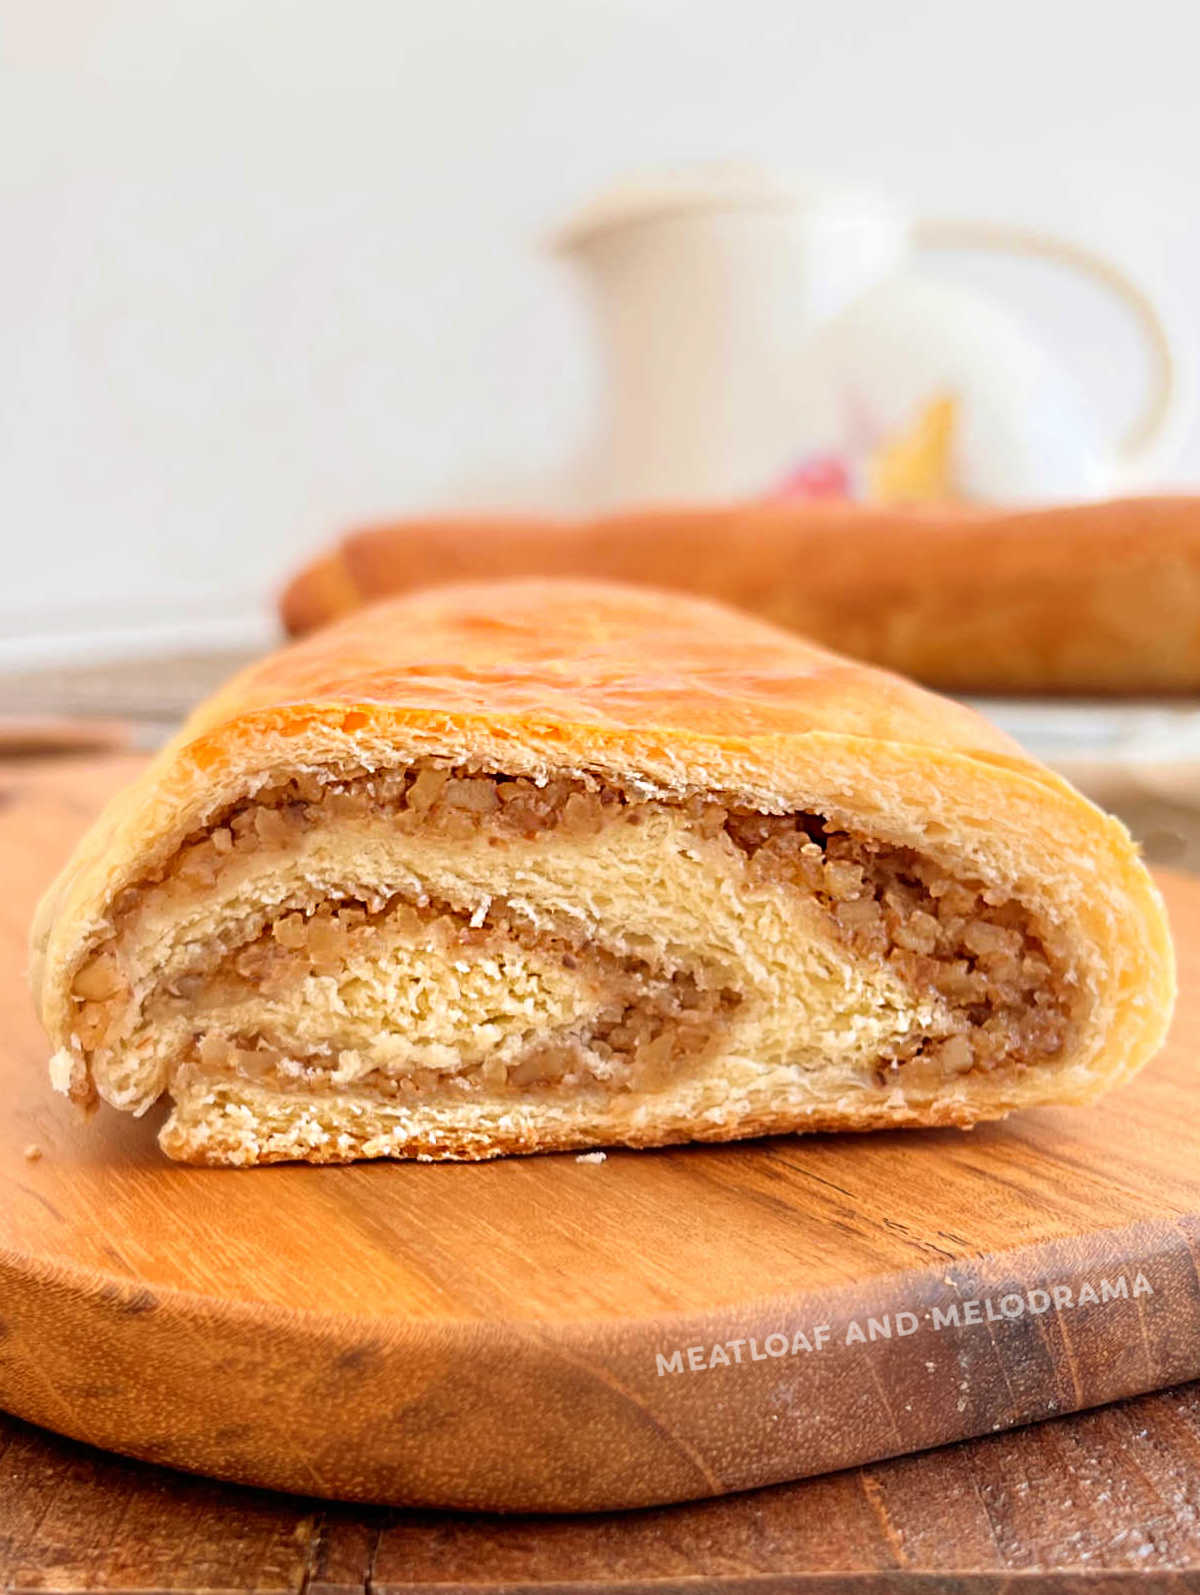 cut nut roll with swirled walnut filling on the table